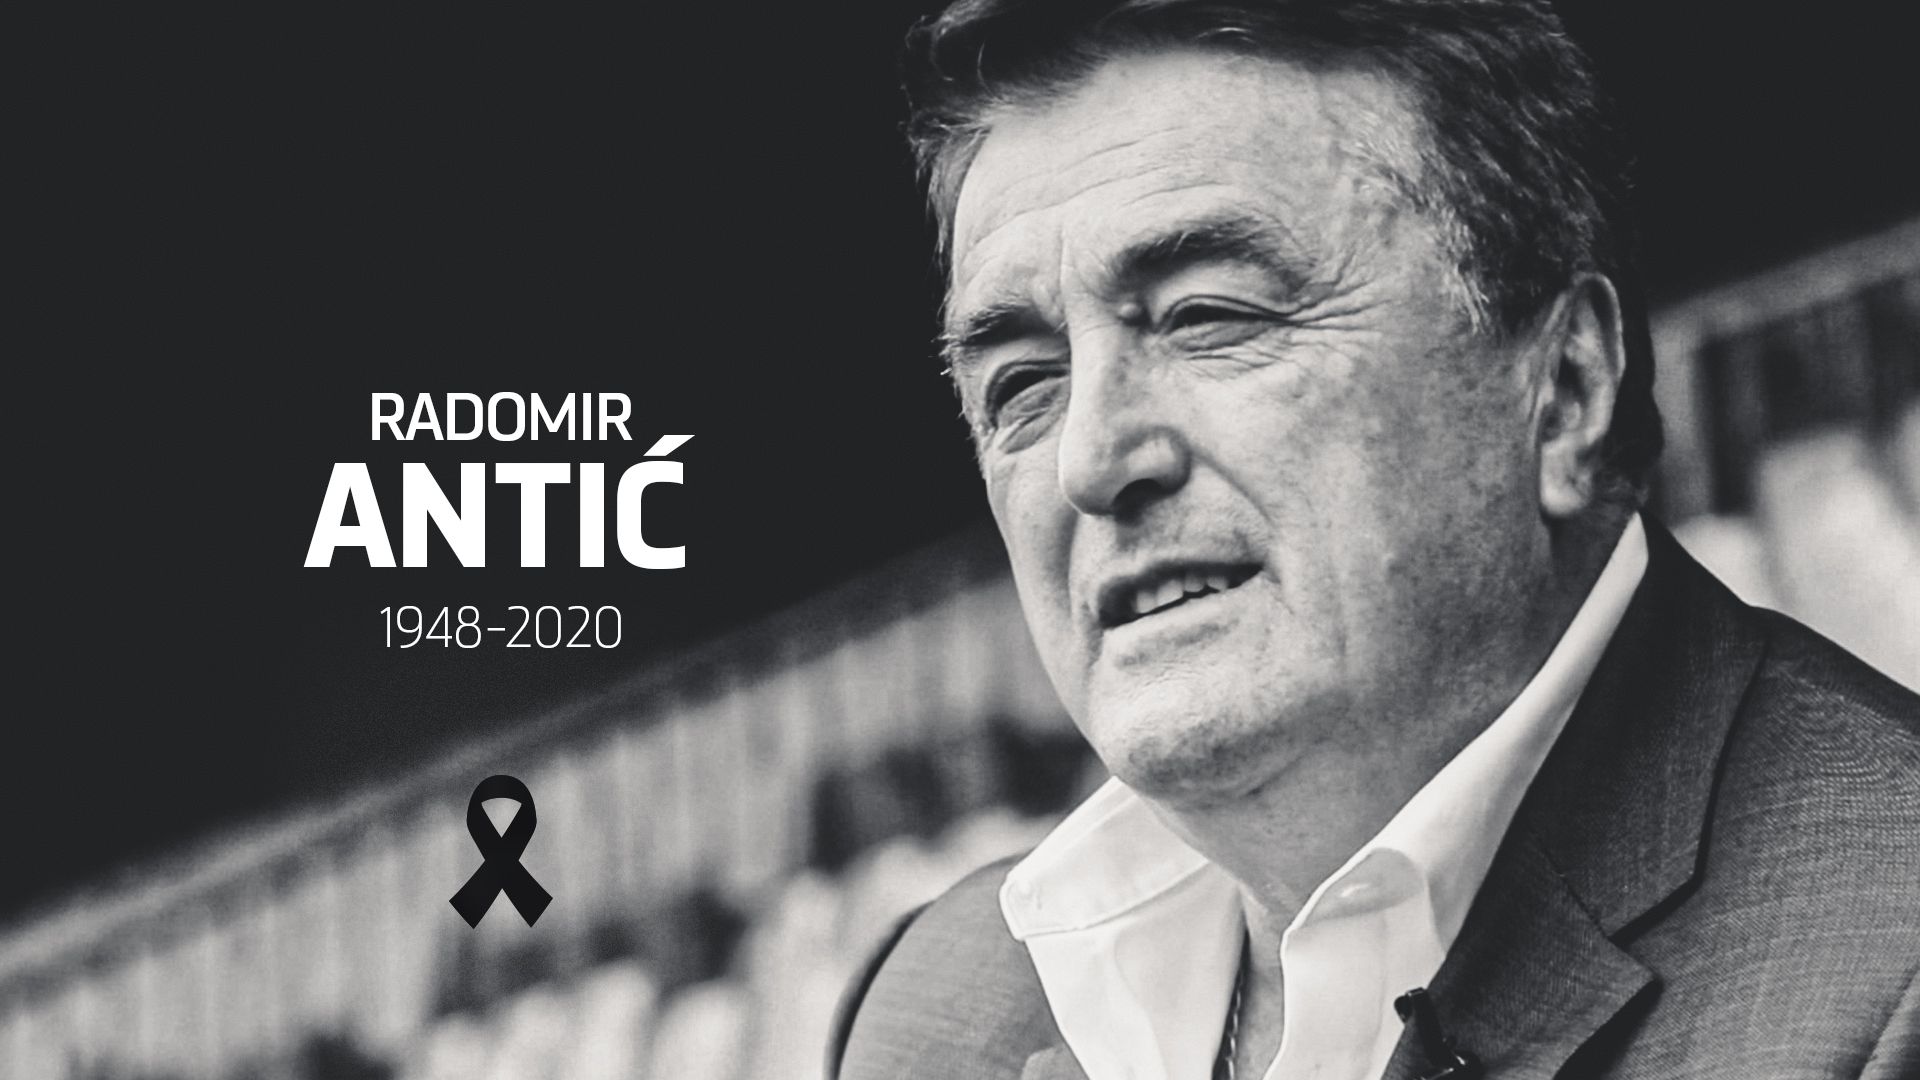 Atlético de Madrid Atlético de Madrid family is mourning the passing of Radomir Antić, one of our legendary coaches. You will forever live in our hearts. Rest in peace